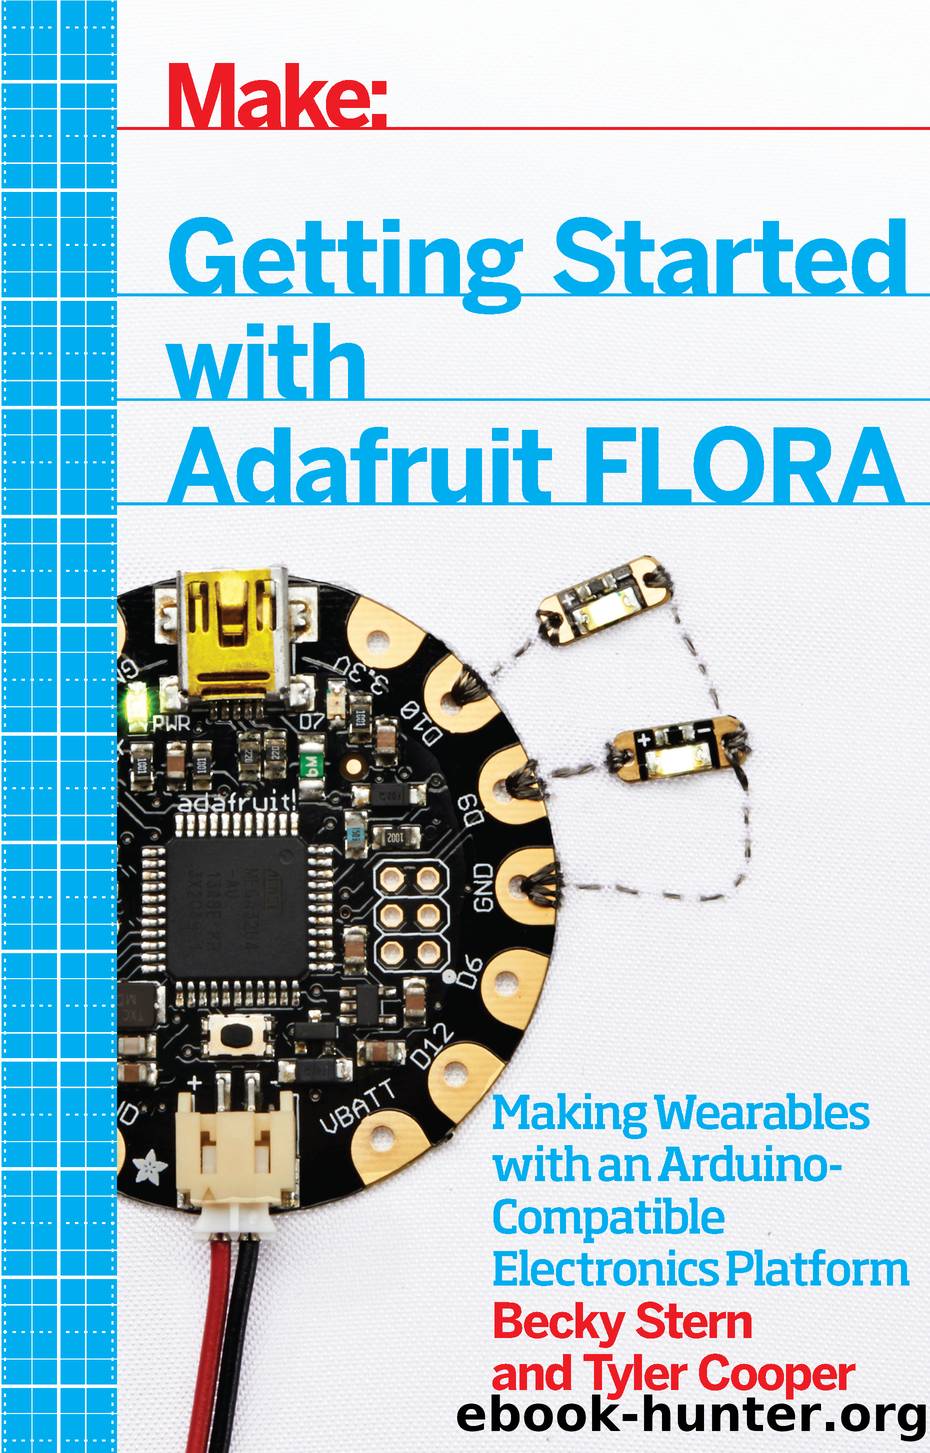 Getting Started with Adafruit FLORA by Becky Stern and Tyler Cooper